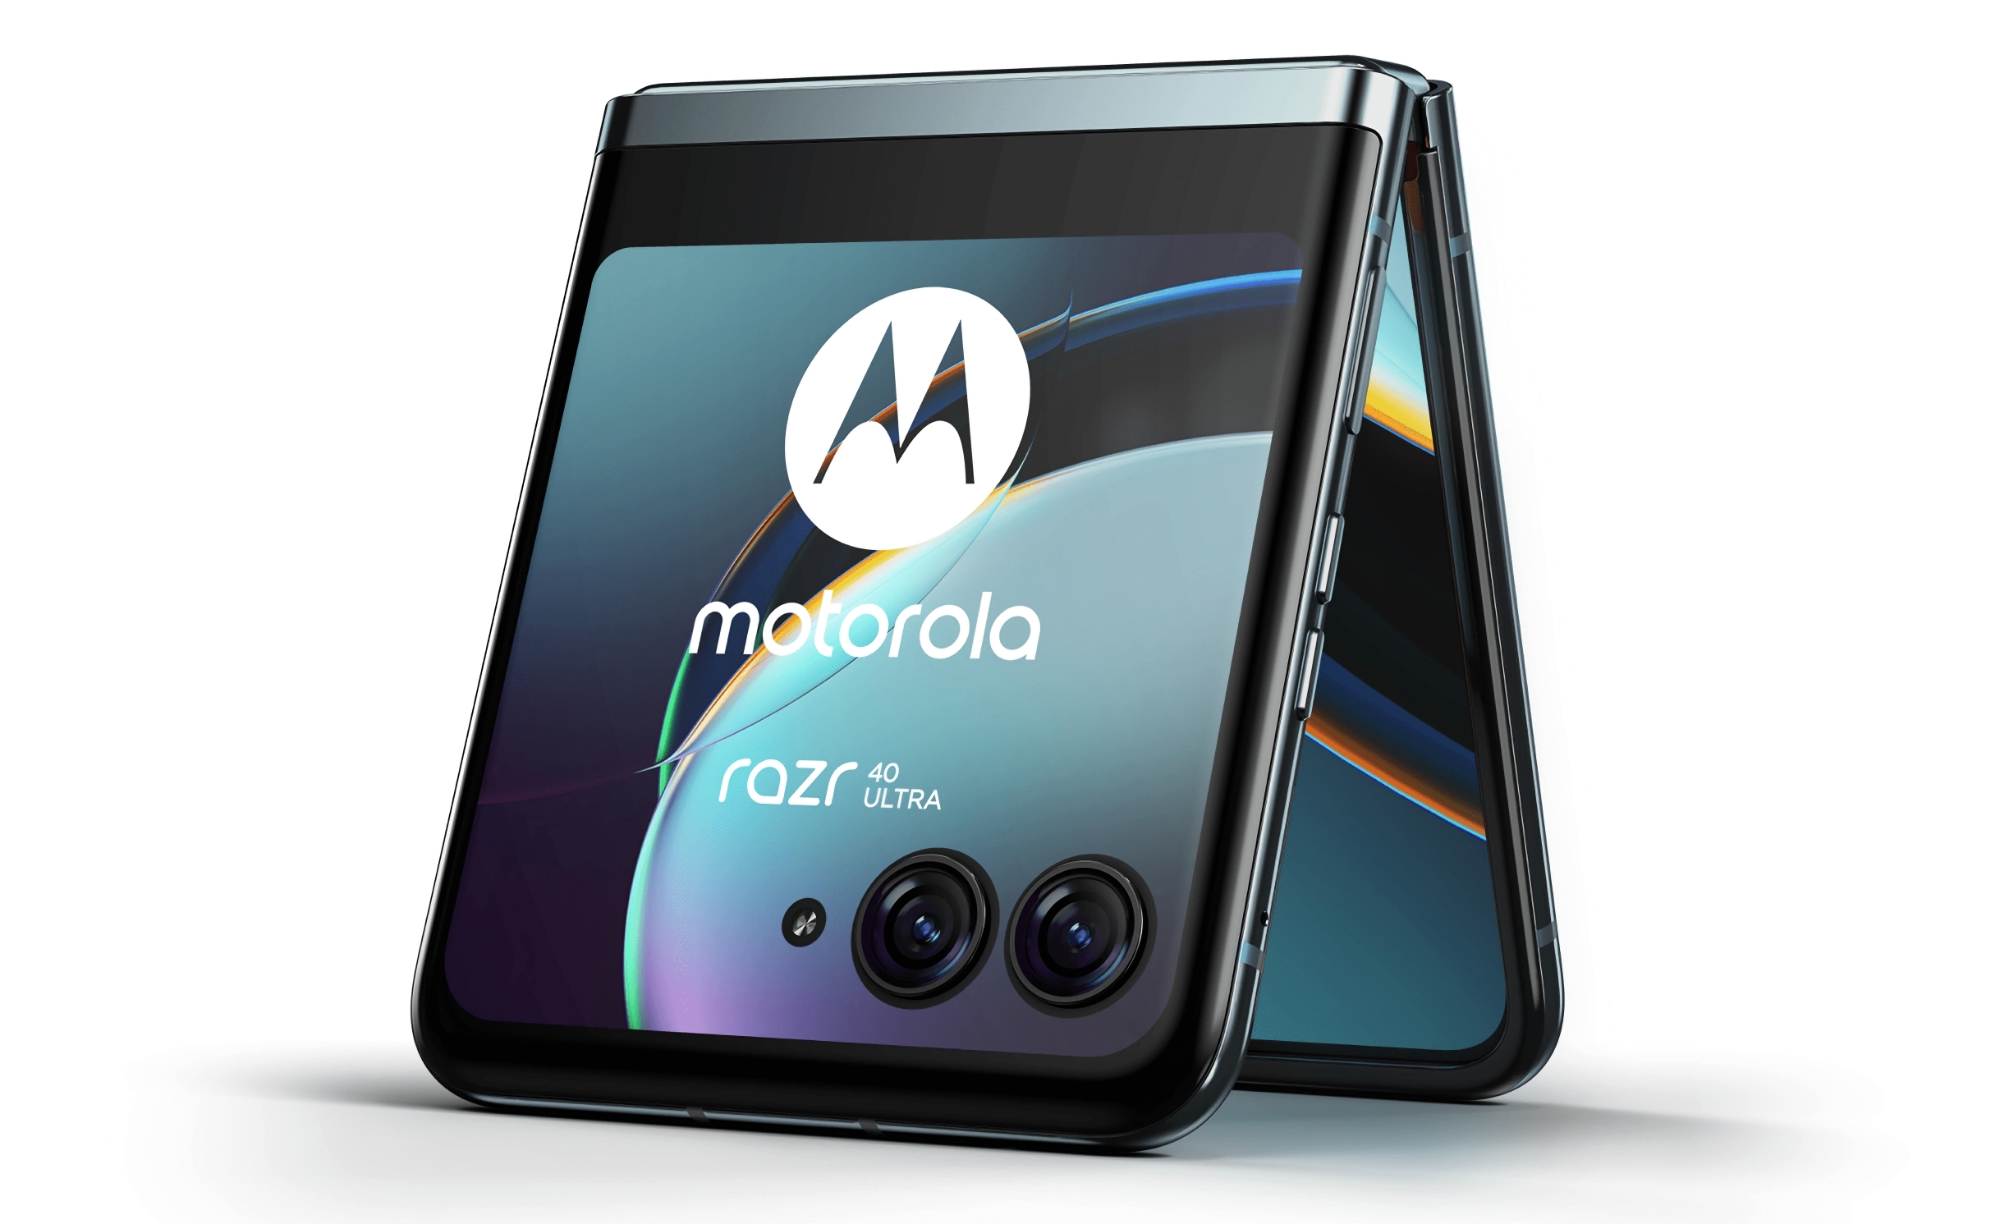 Two 165Hz POLED displays, Snapdragon 8+ Gen 1 chip and three cameras: details of the Motorola Razr 40 Ultra have surfaced online